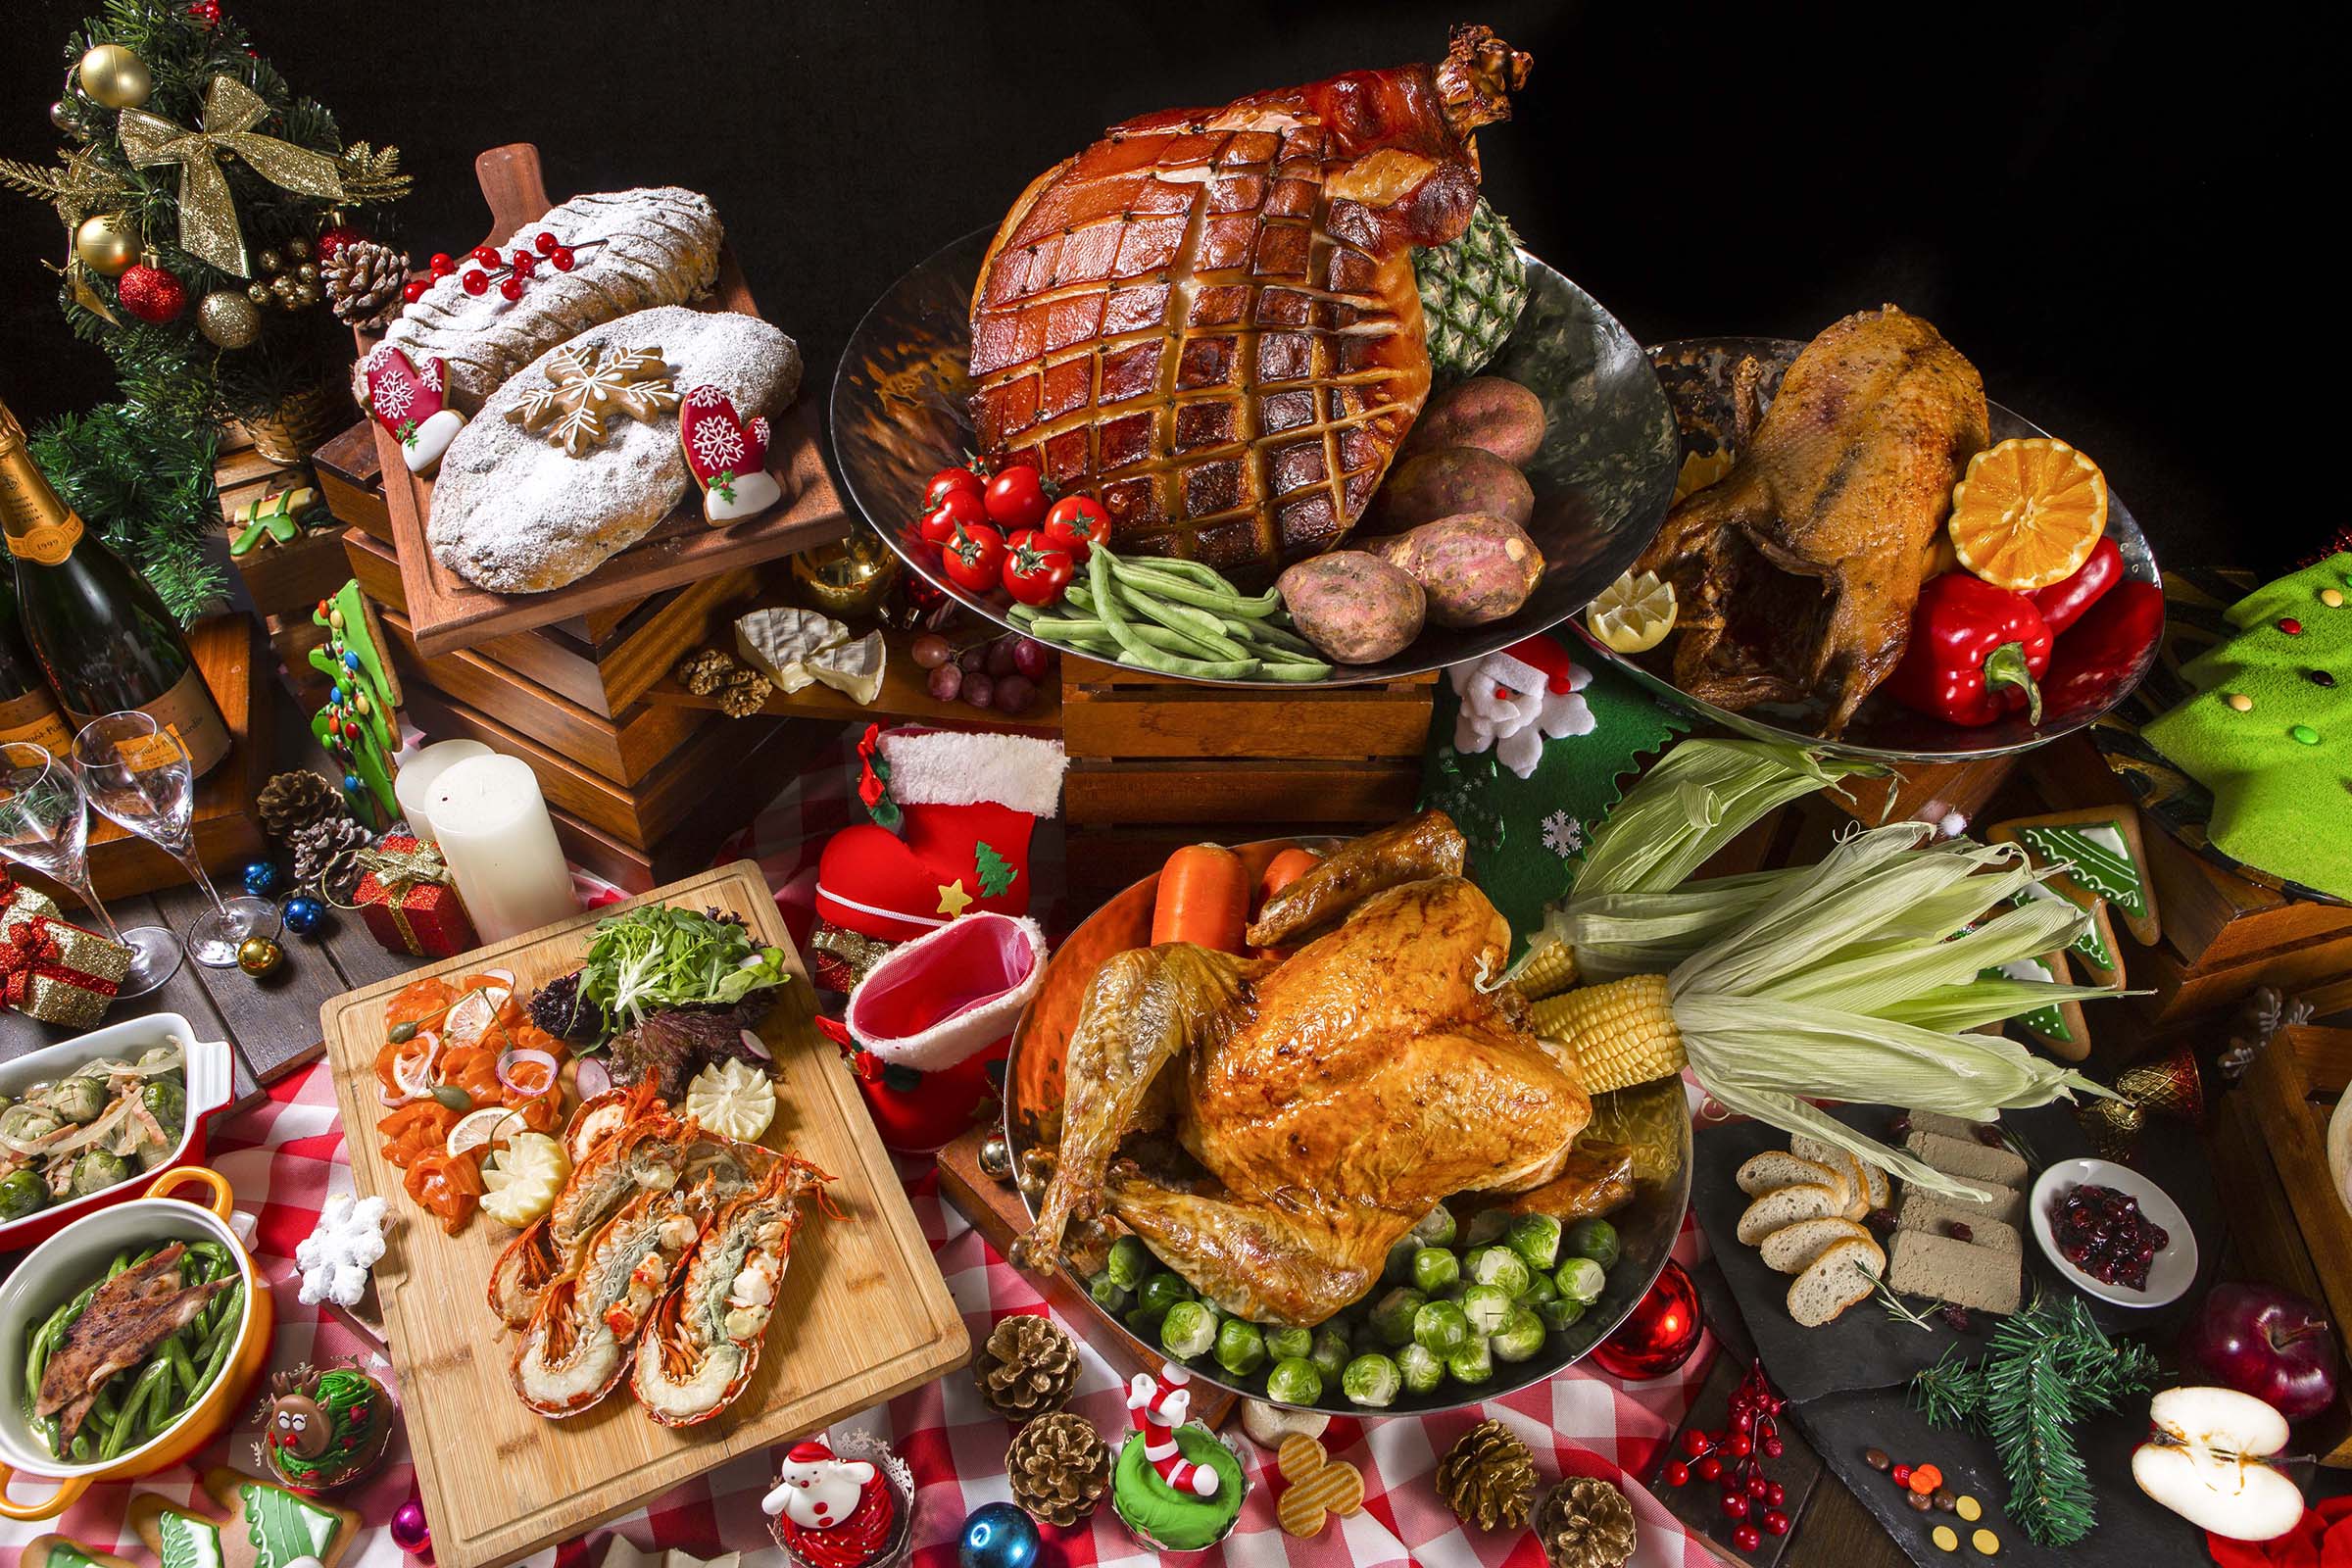 Traditional Xmas Eve Dinner Uk : 70 Traditional Christmas Eve Dinner Ideas #christmasdinner ...